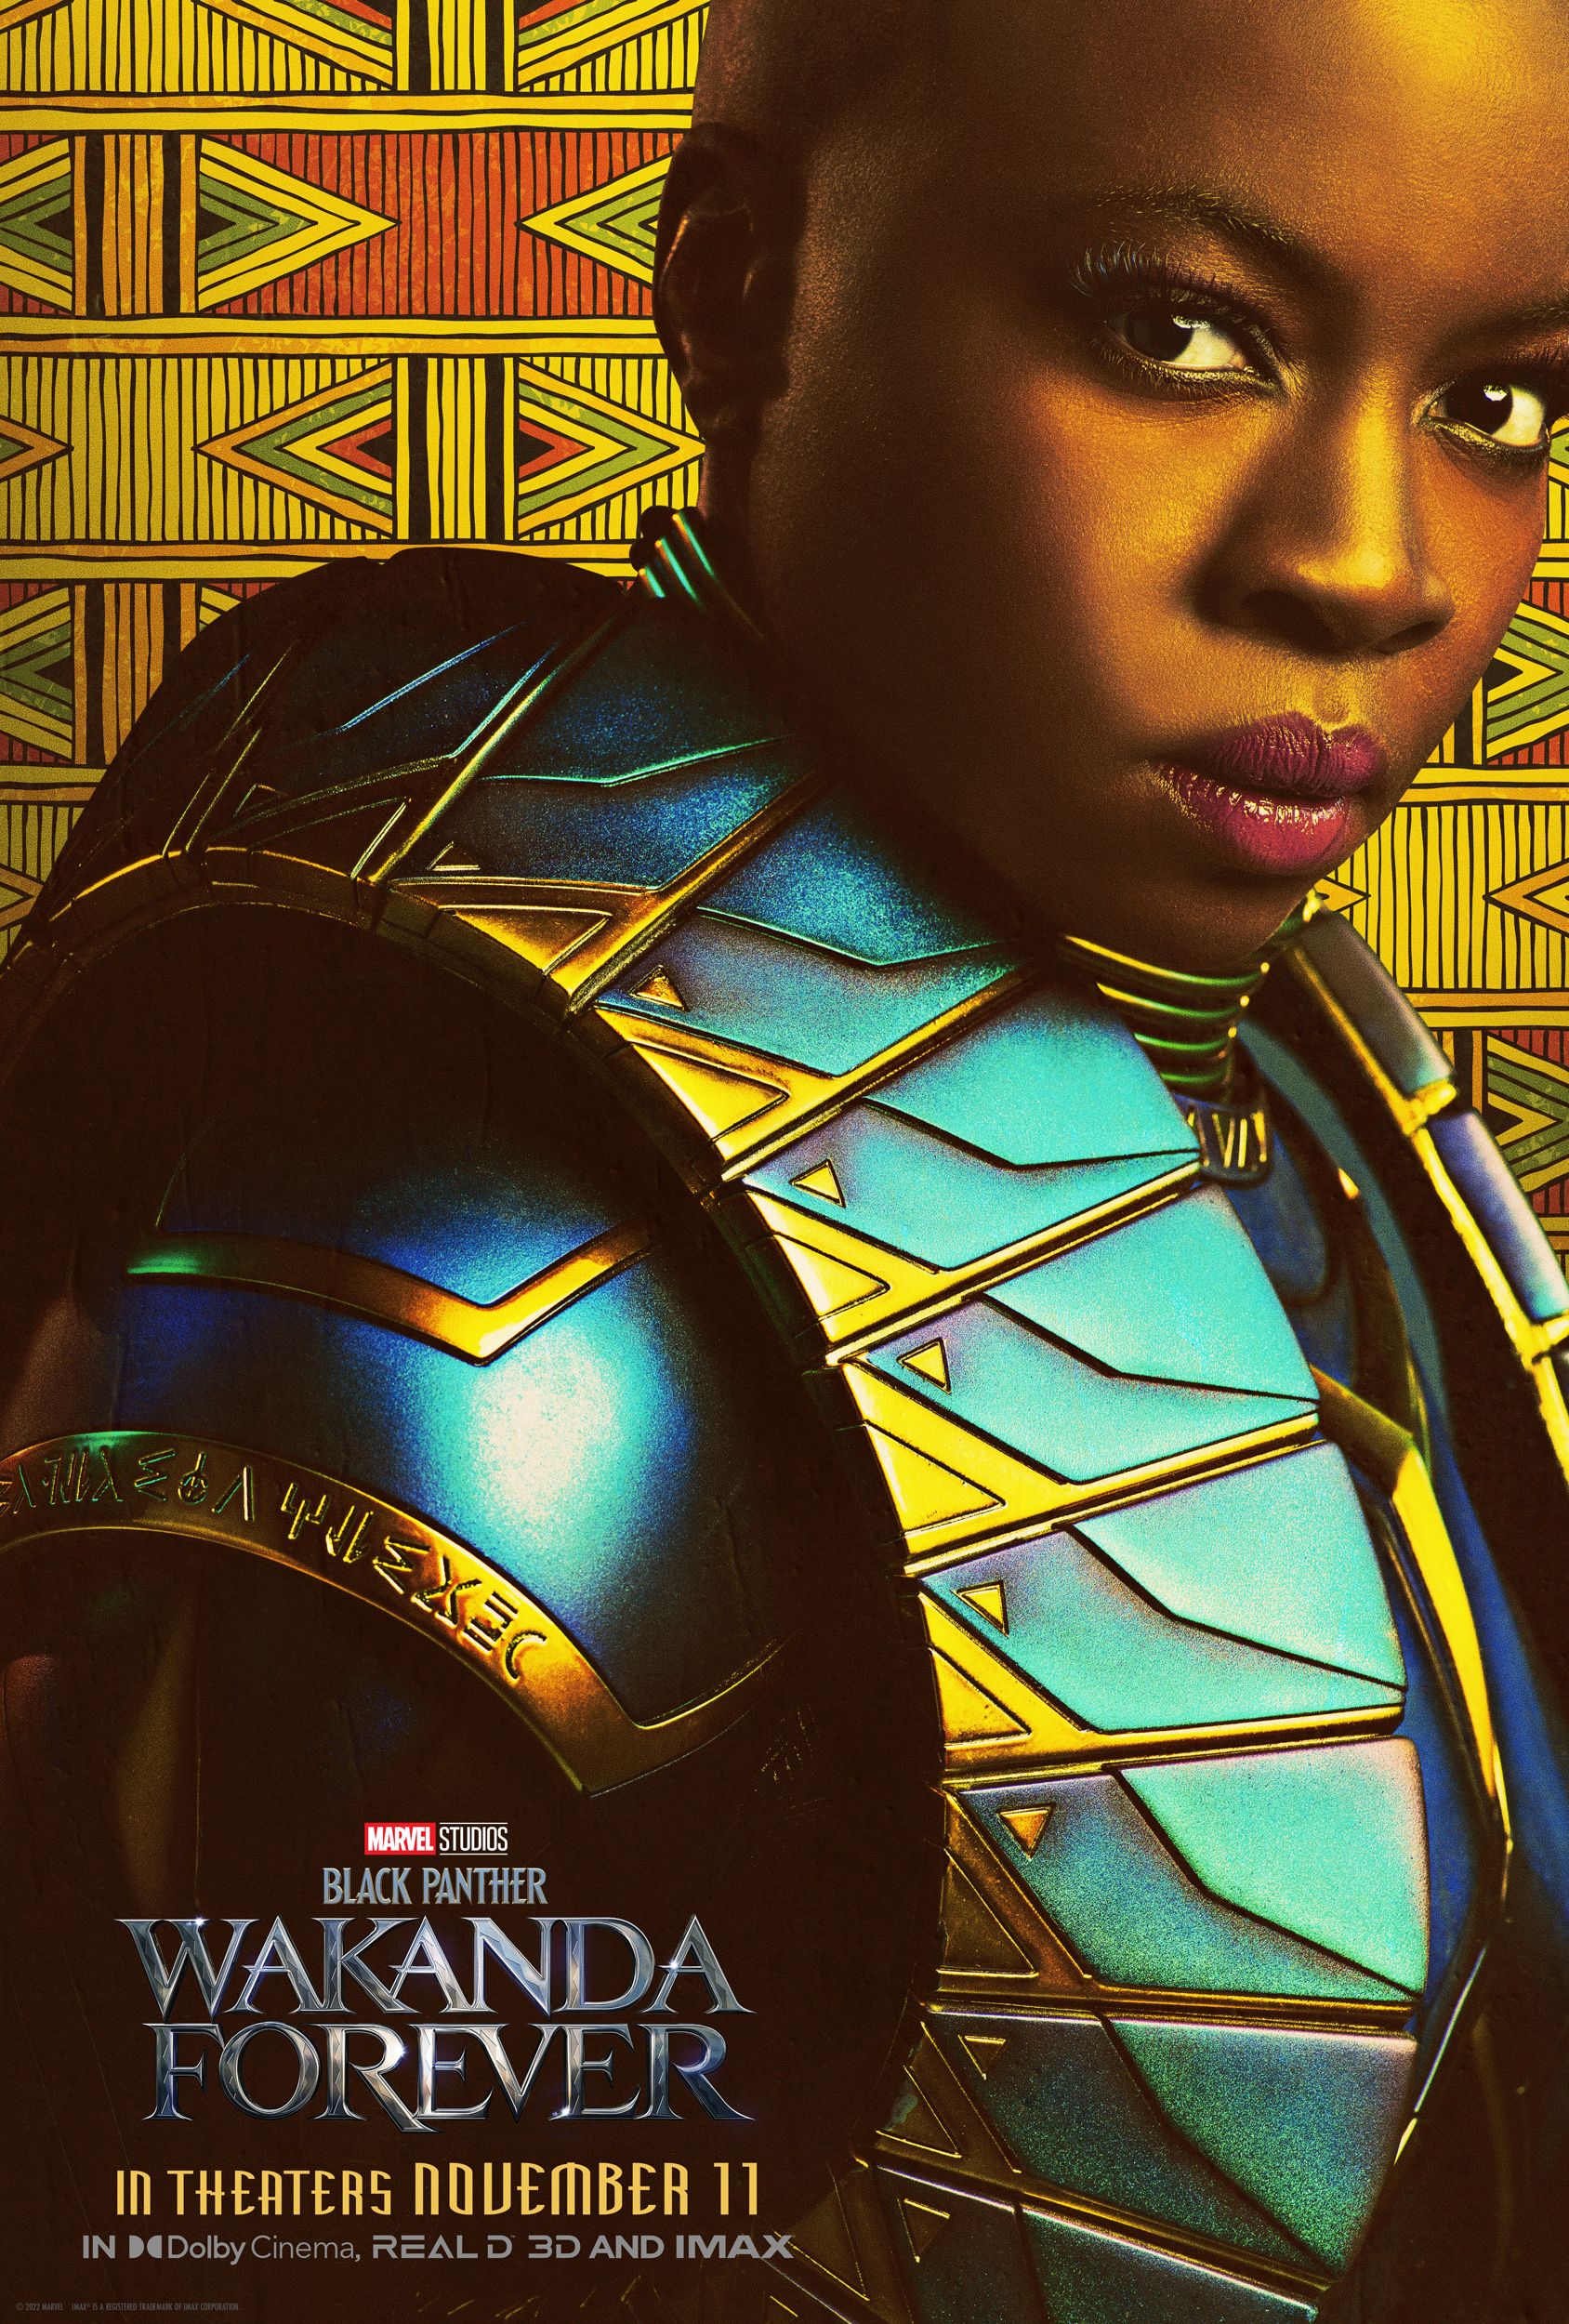 Danai Gurira in a poster for Black Panther: Wakanda Forever